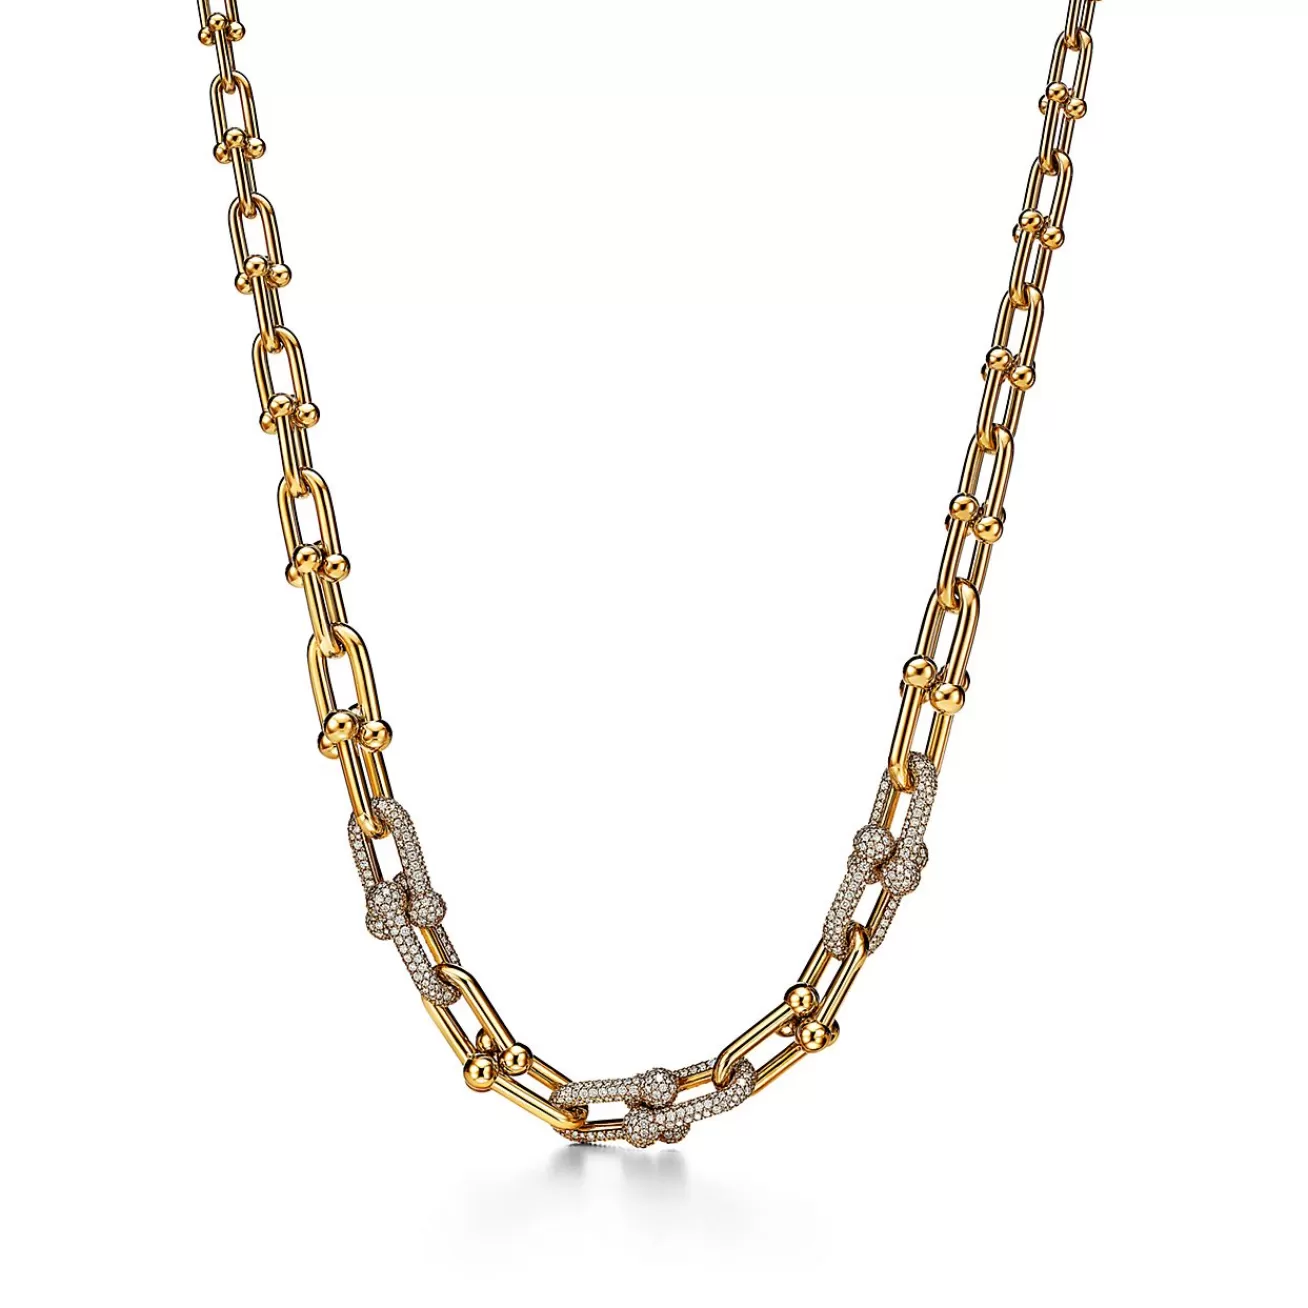 Tiffany & Co. Tiffany HardWear Graduated Link Necklace in Yellow Gold with Pavé Diamonds | ^ Necklaces & Pendants | Gold Jewelry